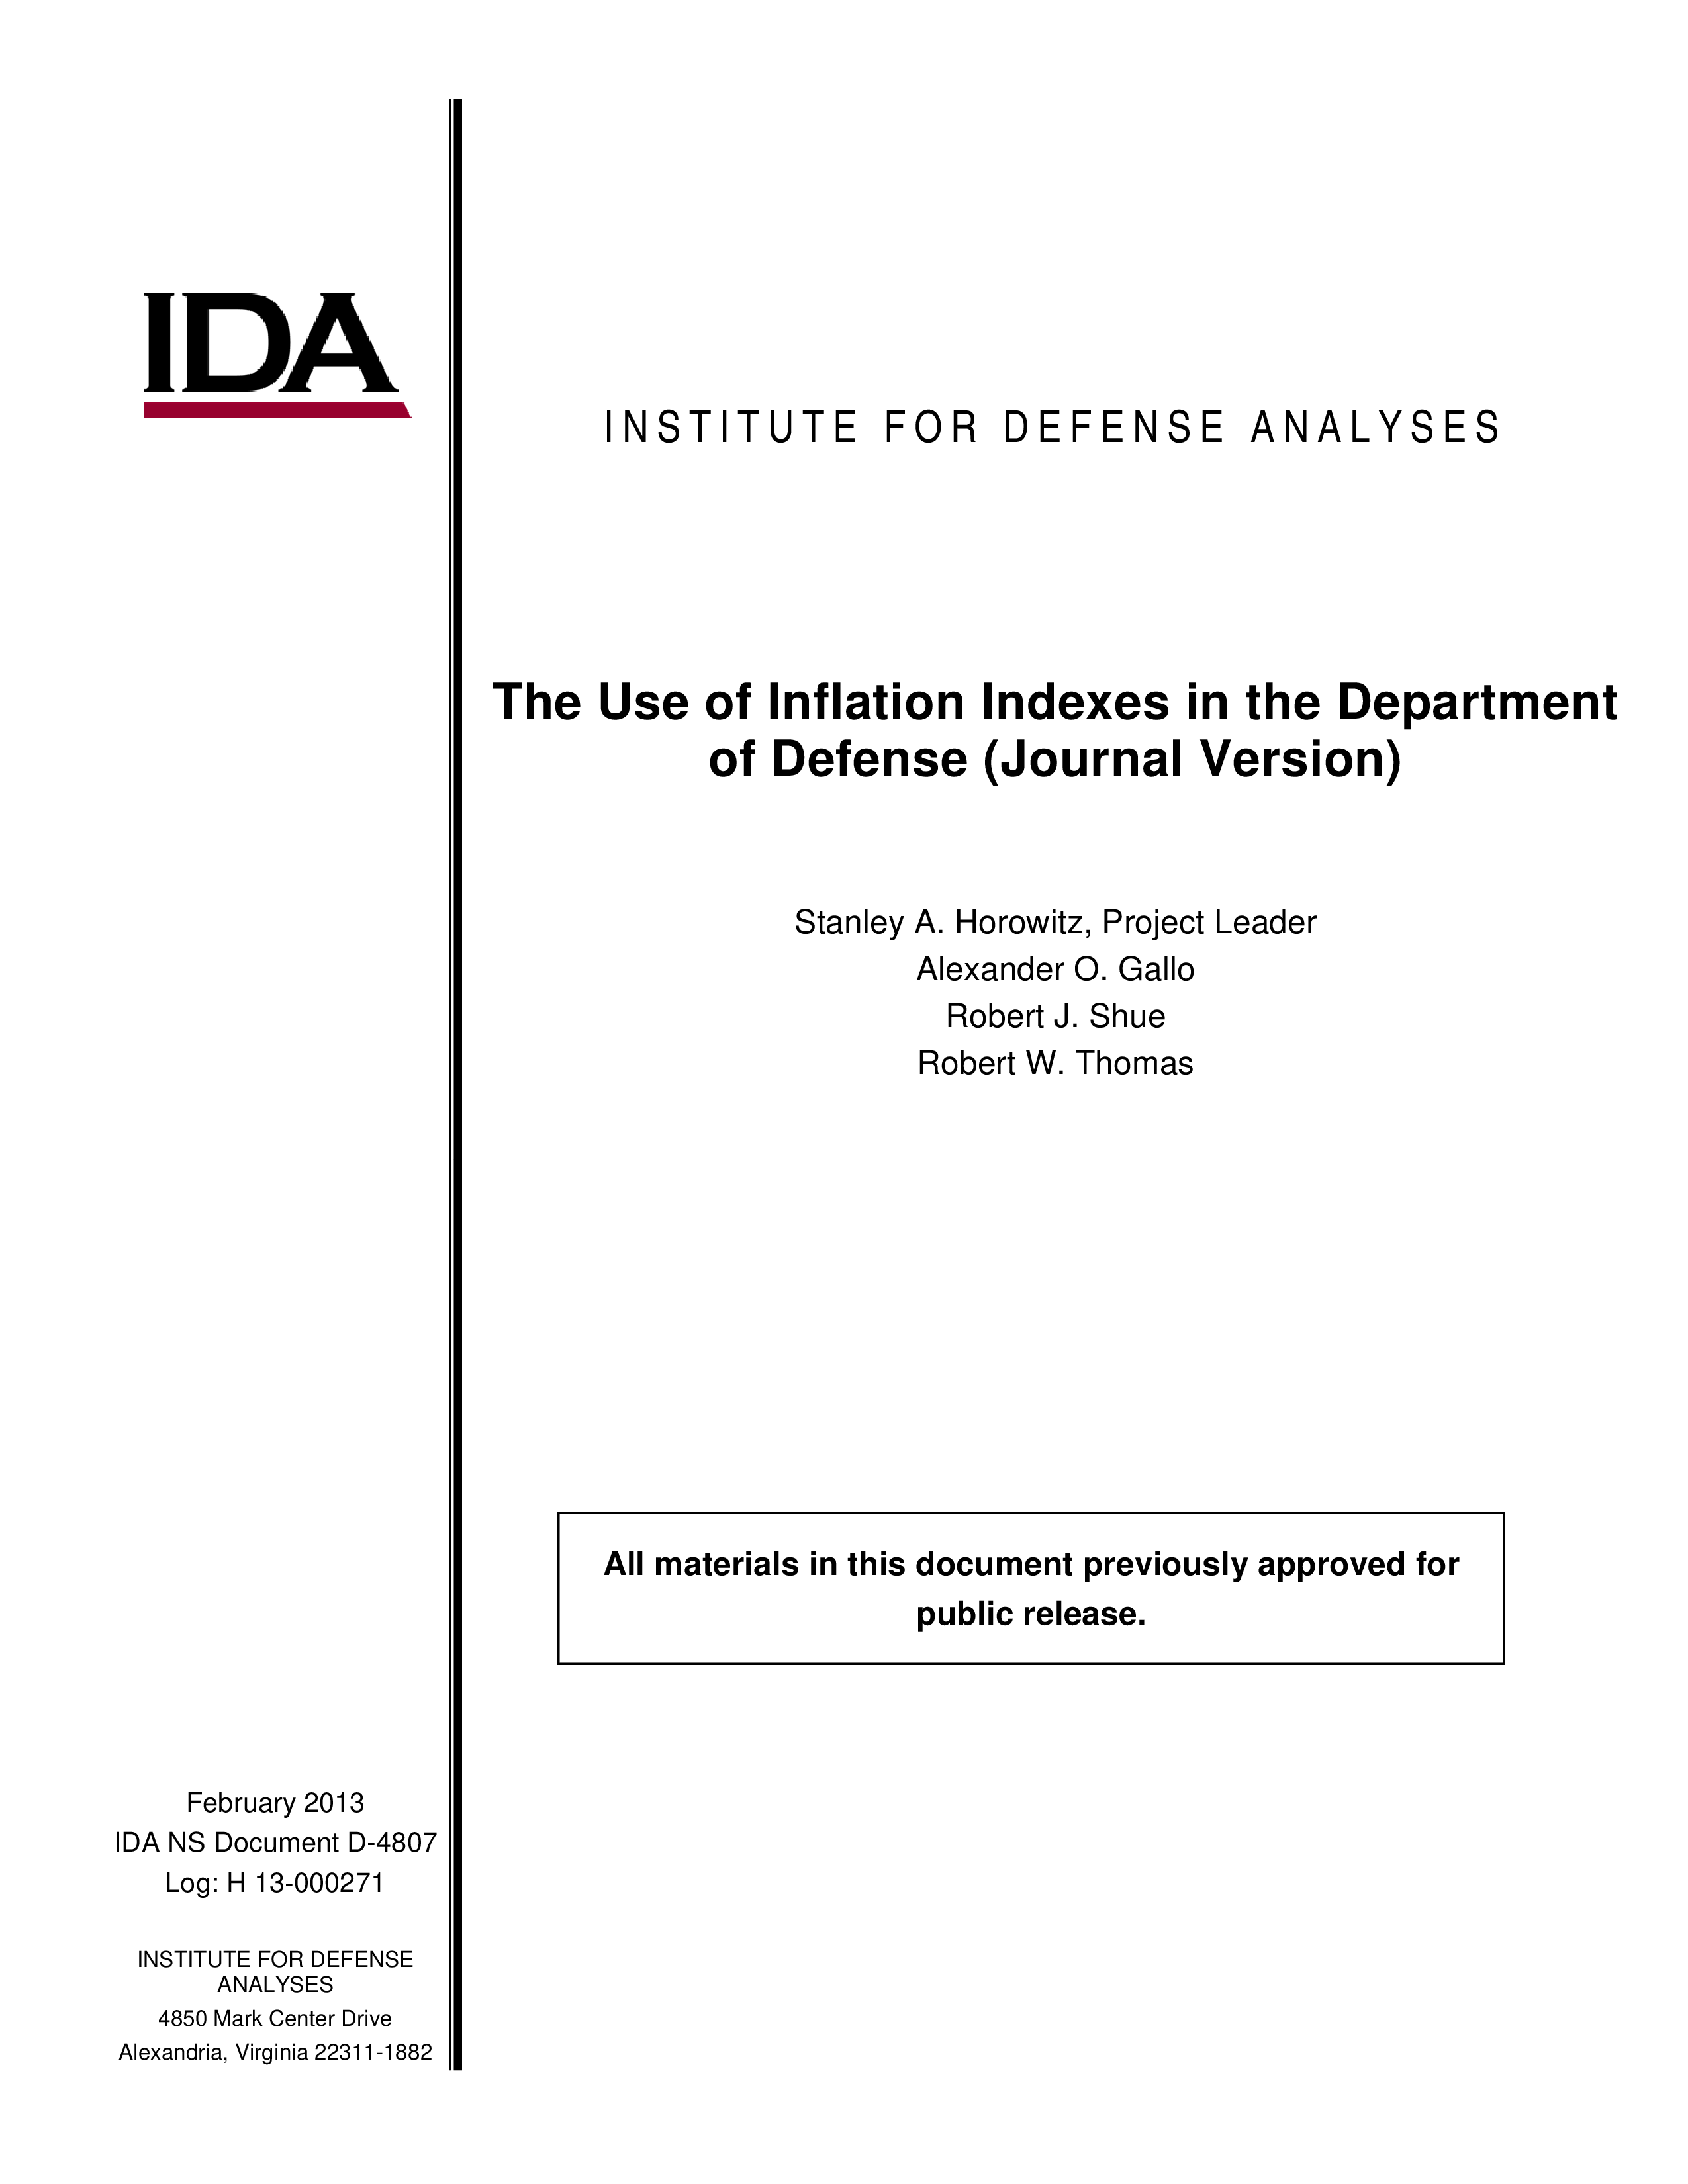 The Use of Inflation Indexes in the Department of Defense (Journal Version)